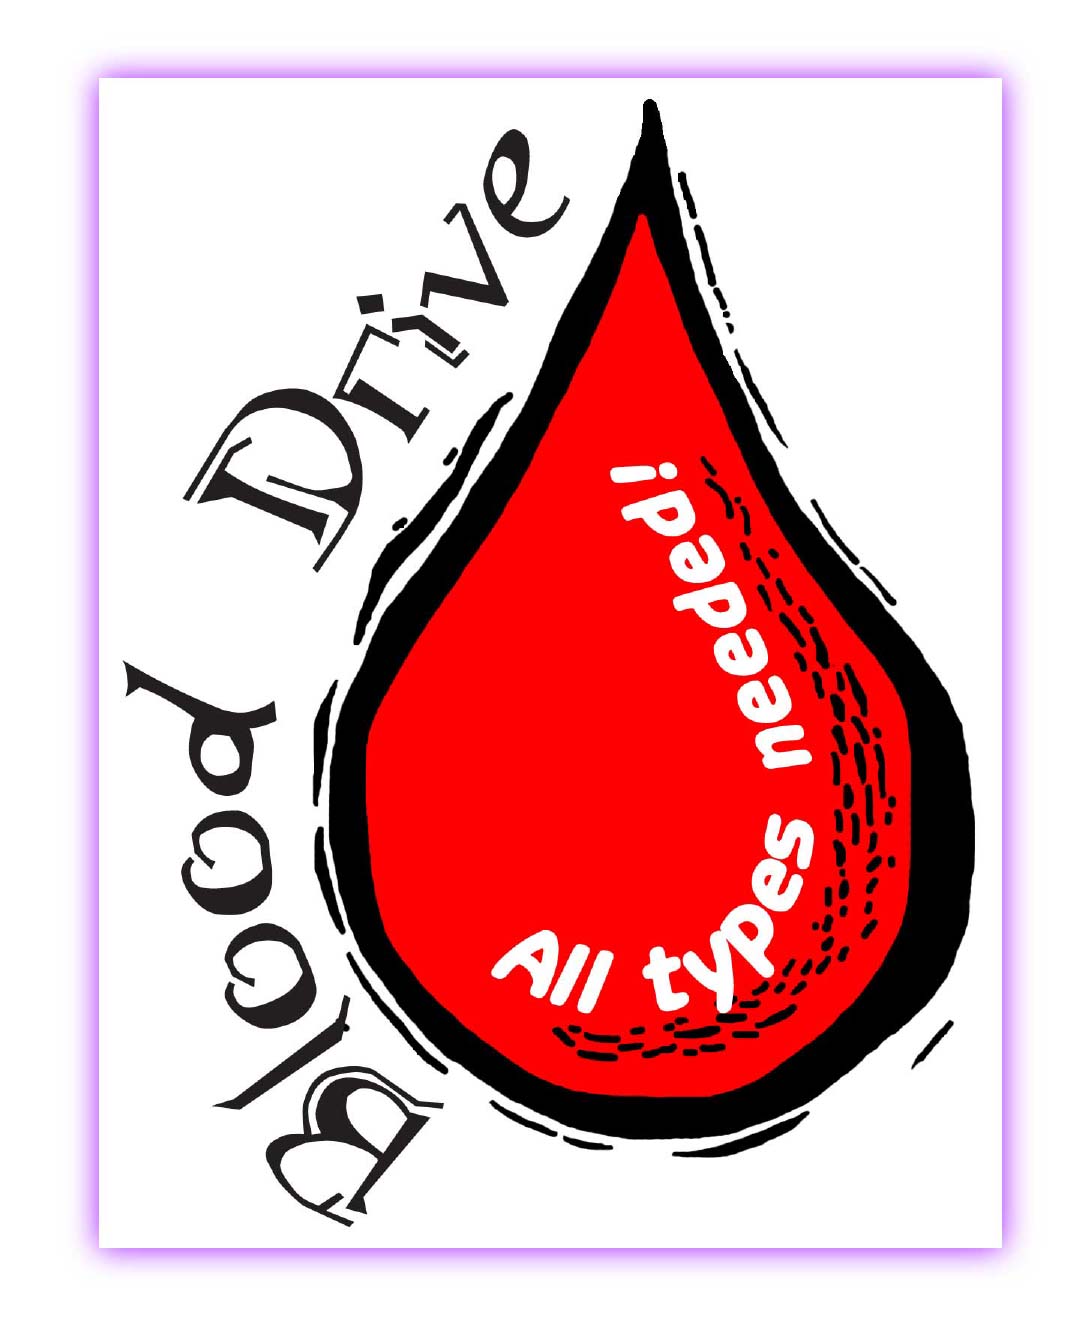 blood bank clipart - photo #12